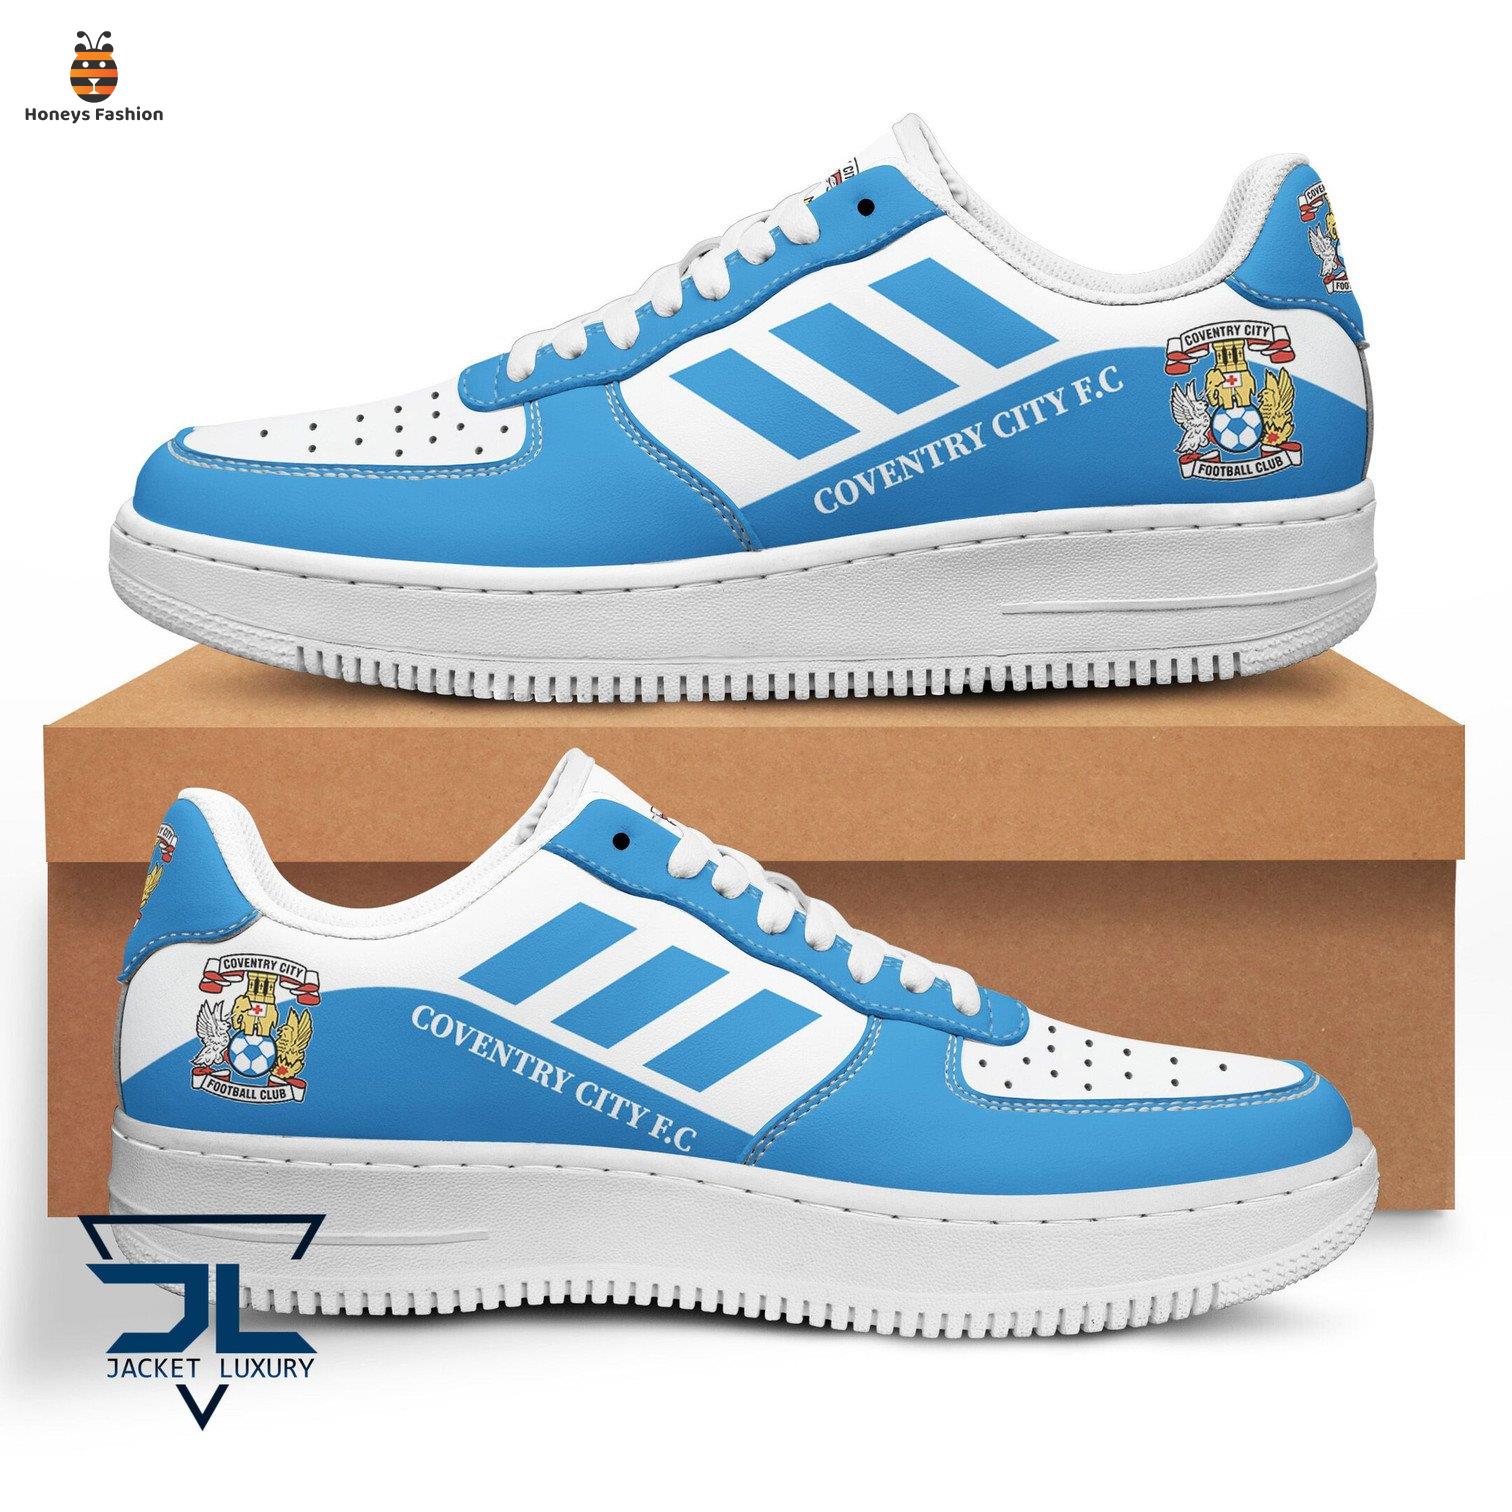 Coventry City F.C air force 1 shoes